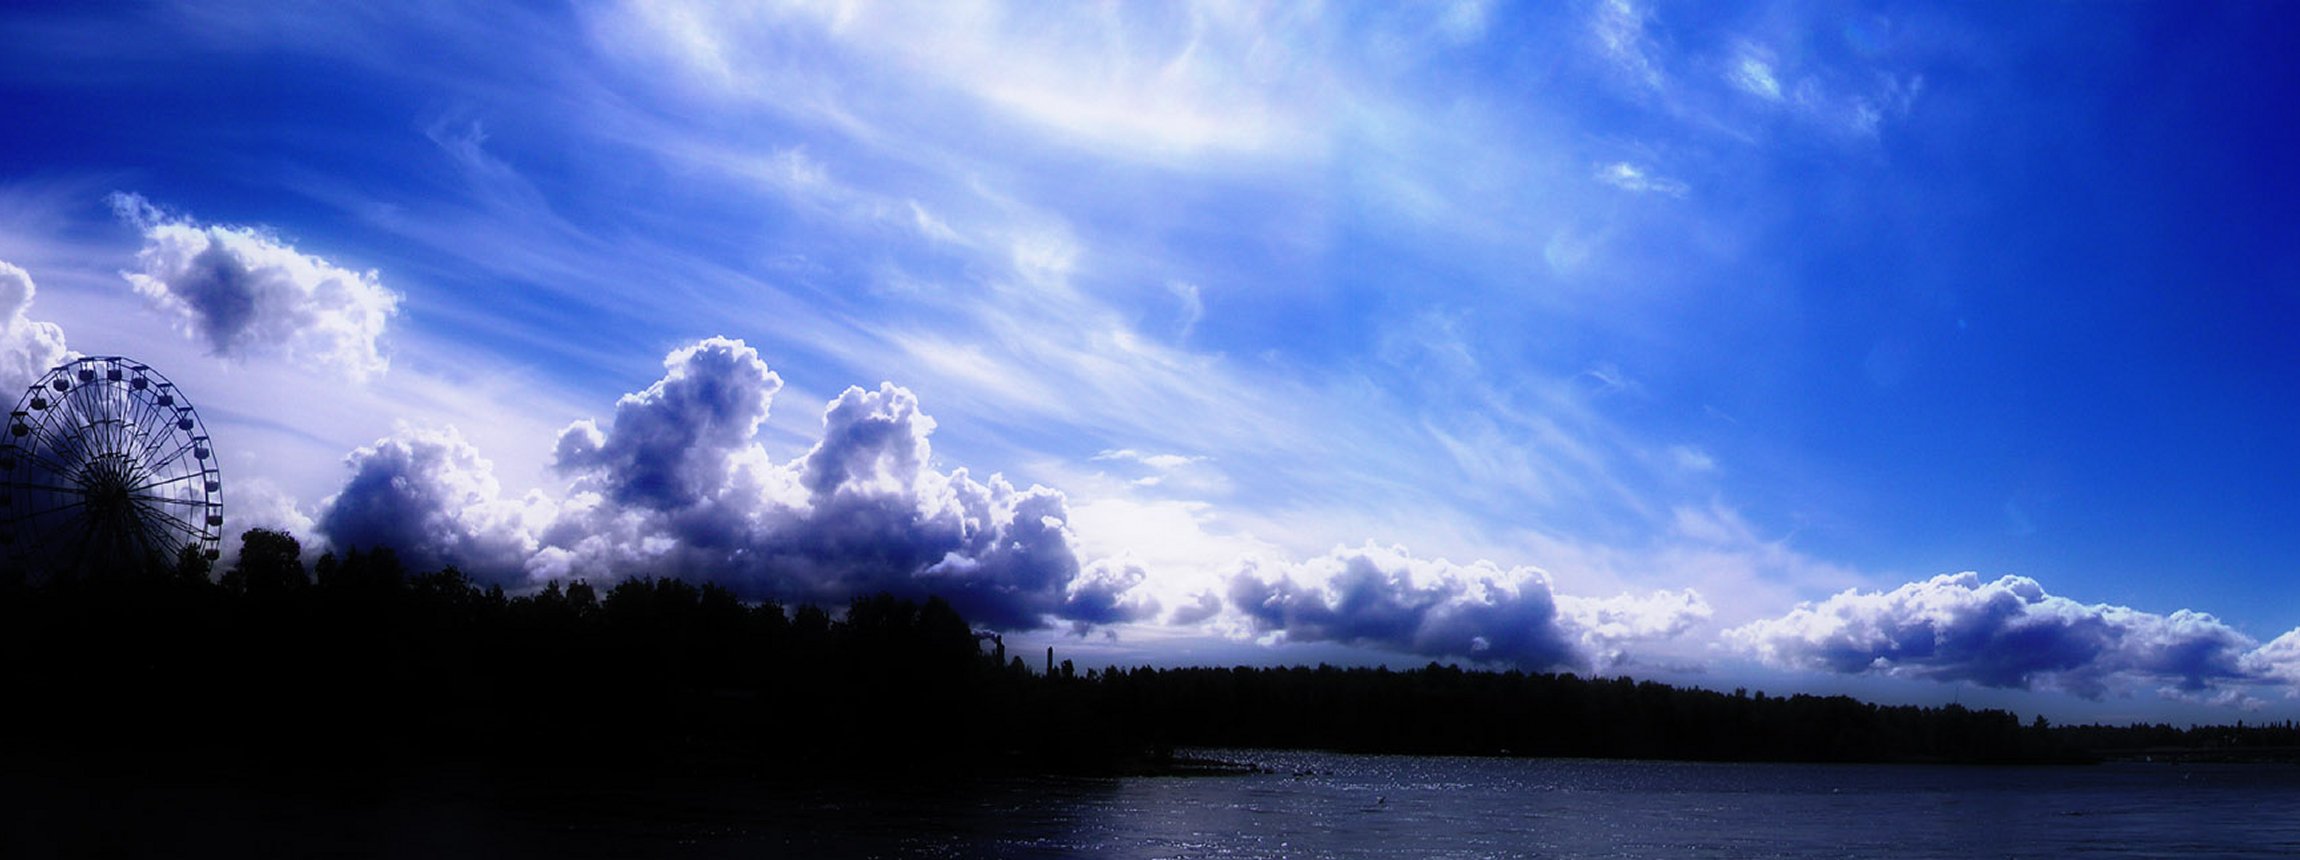 Scenic view of sky reflecting on a calm lake with fluffy clouds